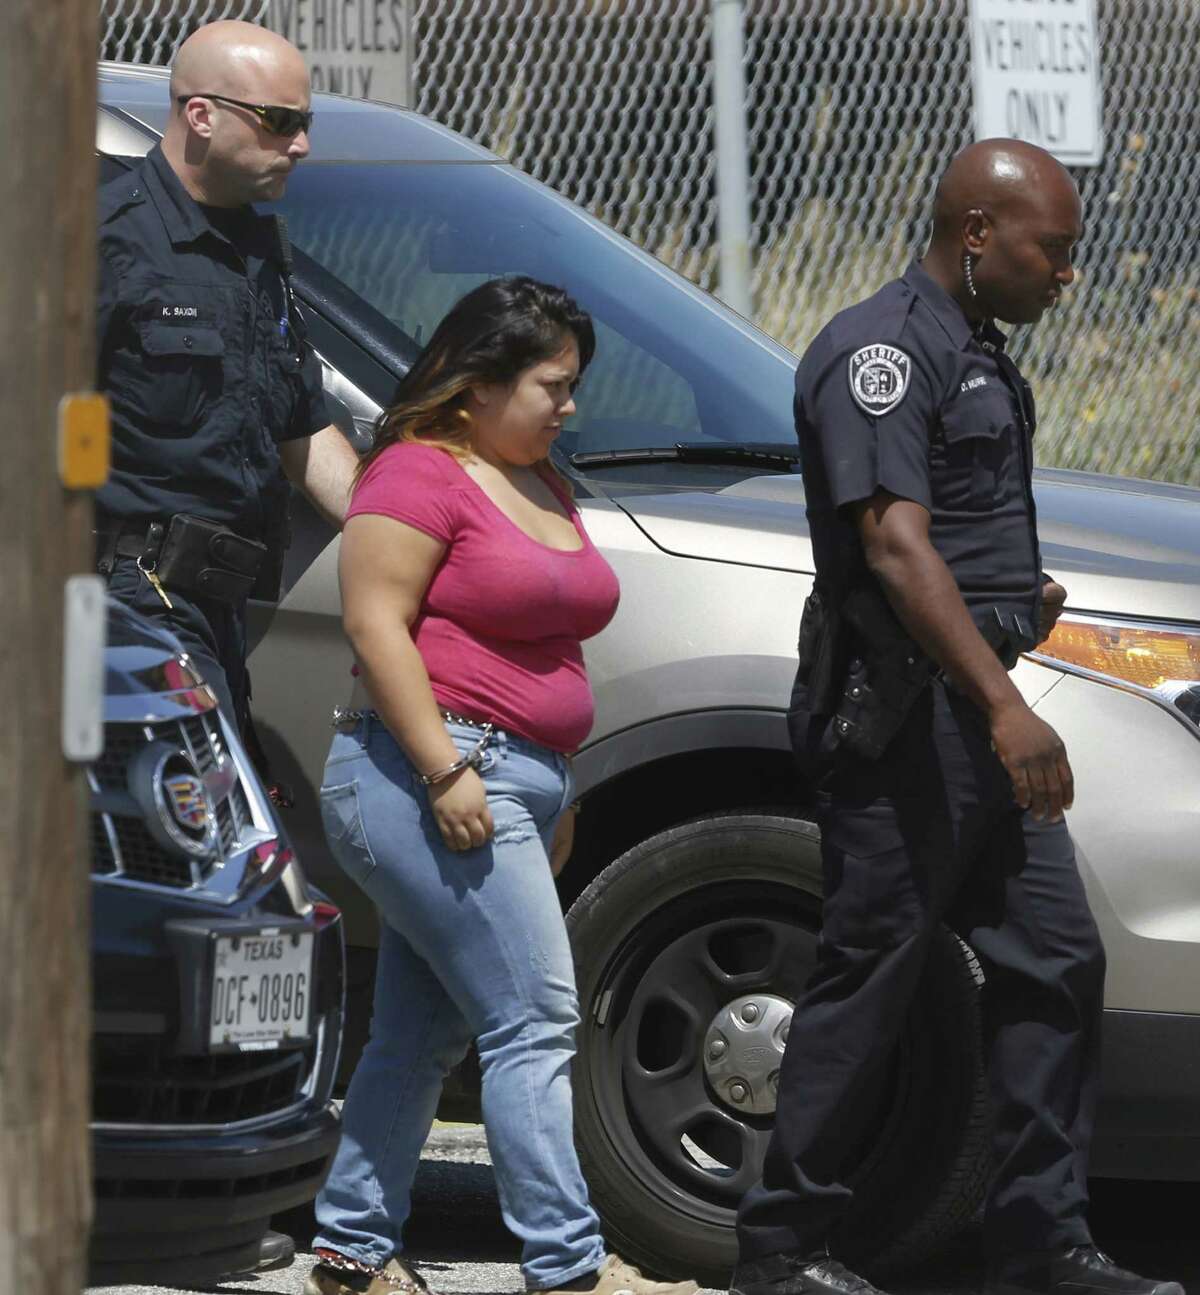 Selena Amanda Huitron, 17, is escorted by Bexar deputies. She faces three counts of aggravated assault of a public servant and one count of evading arrest with a motor vehicle.